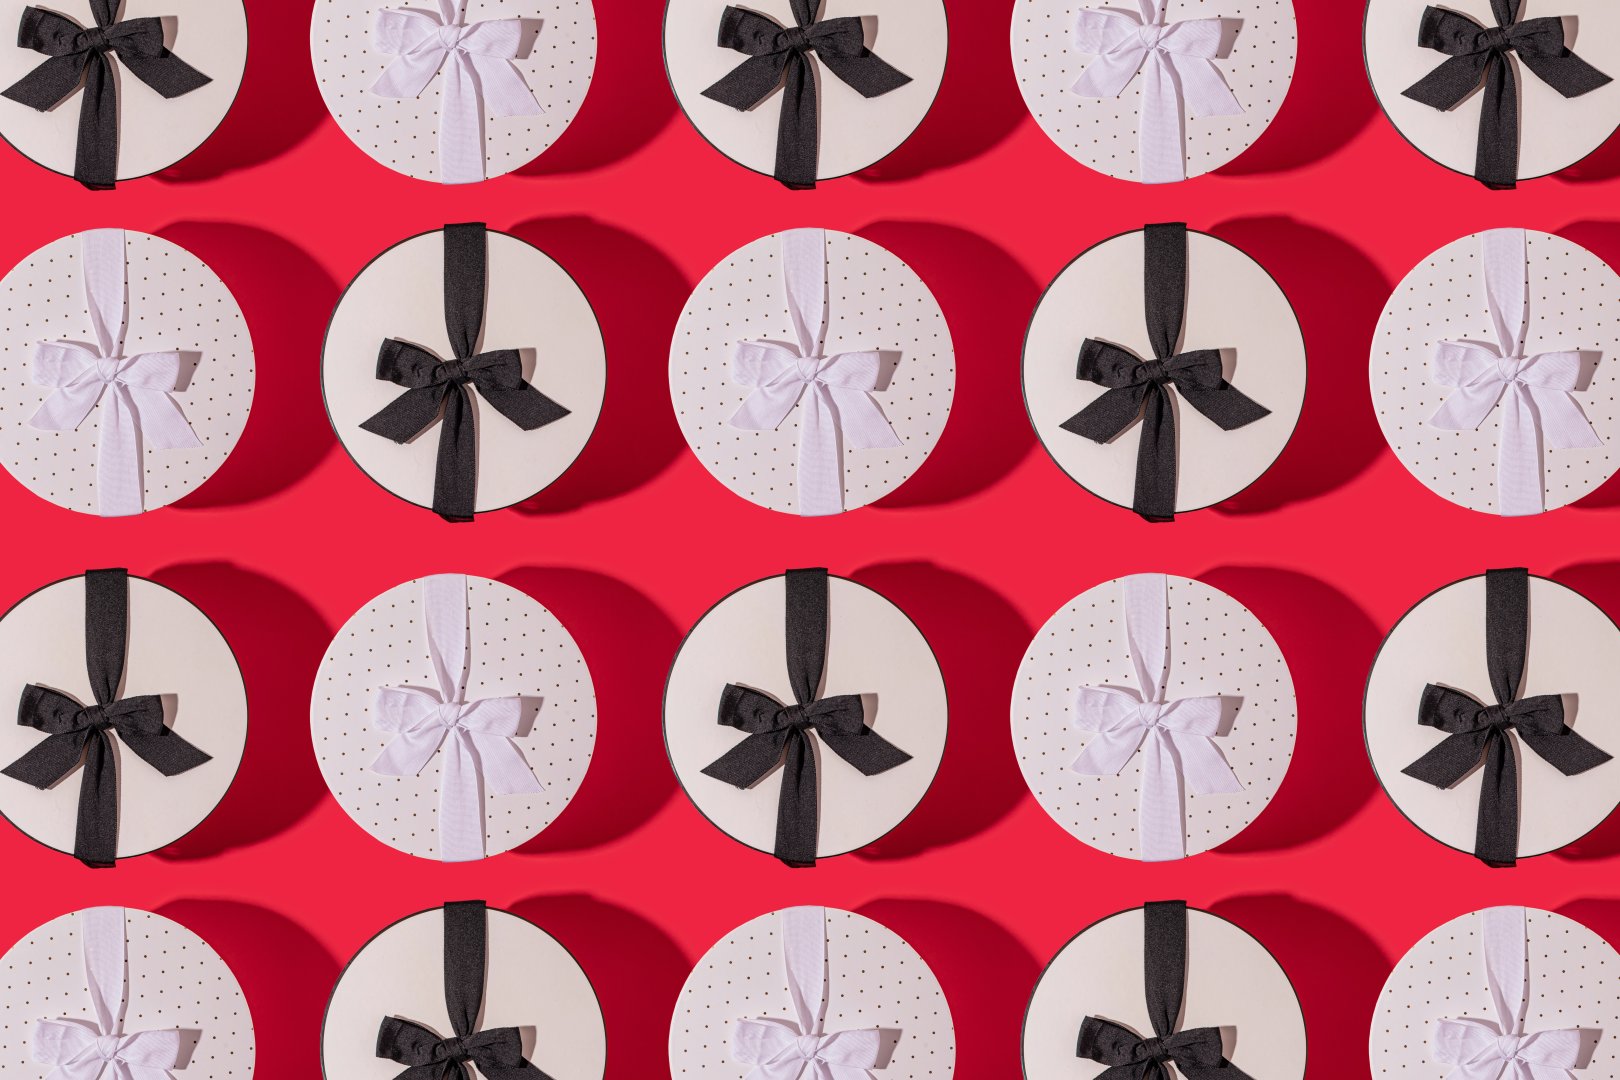 Rows of small, round gift boxes each with a black or white ribbon.